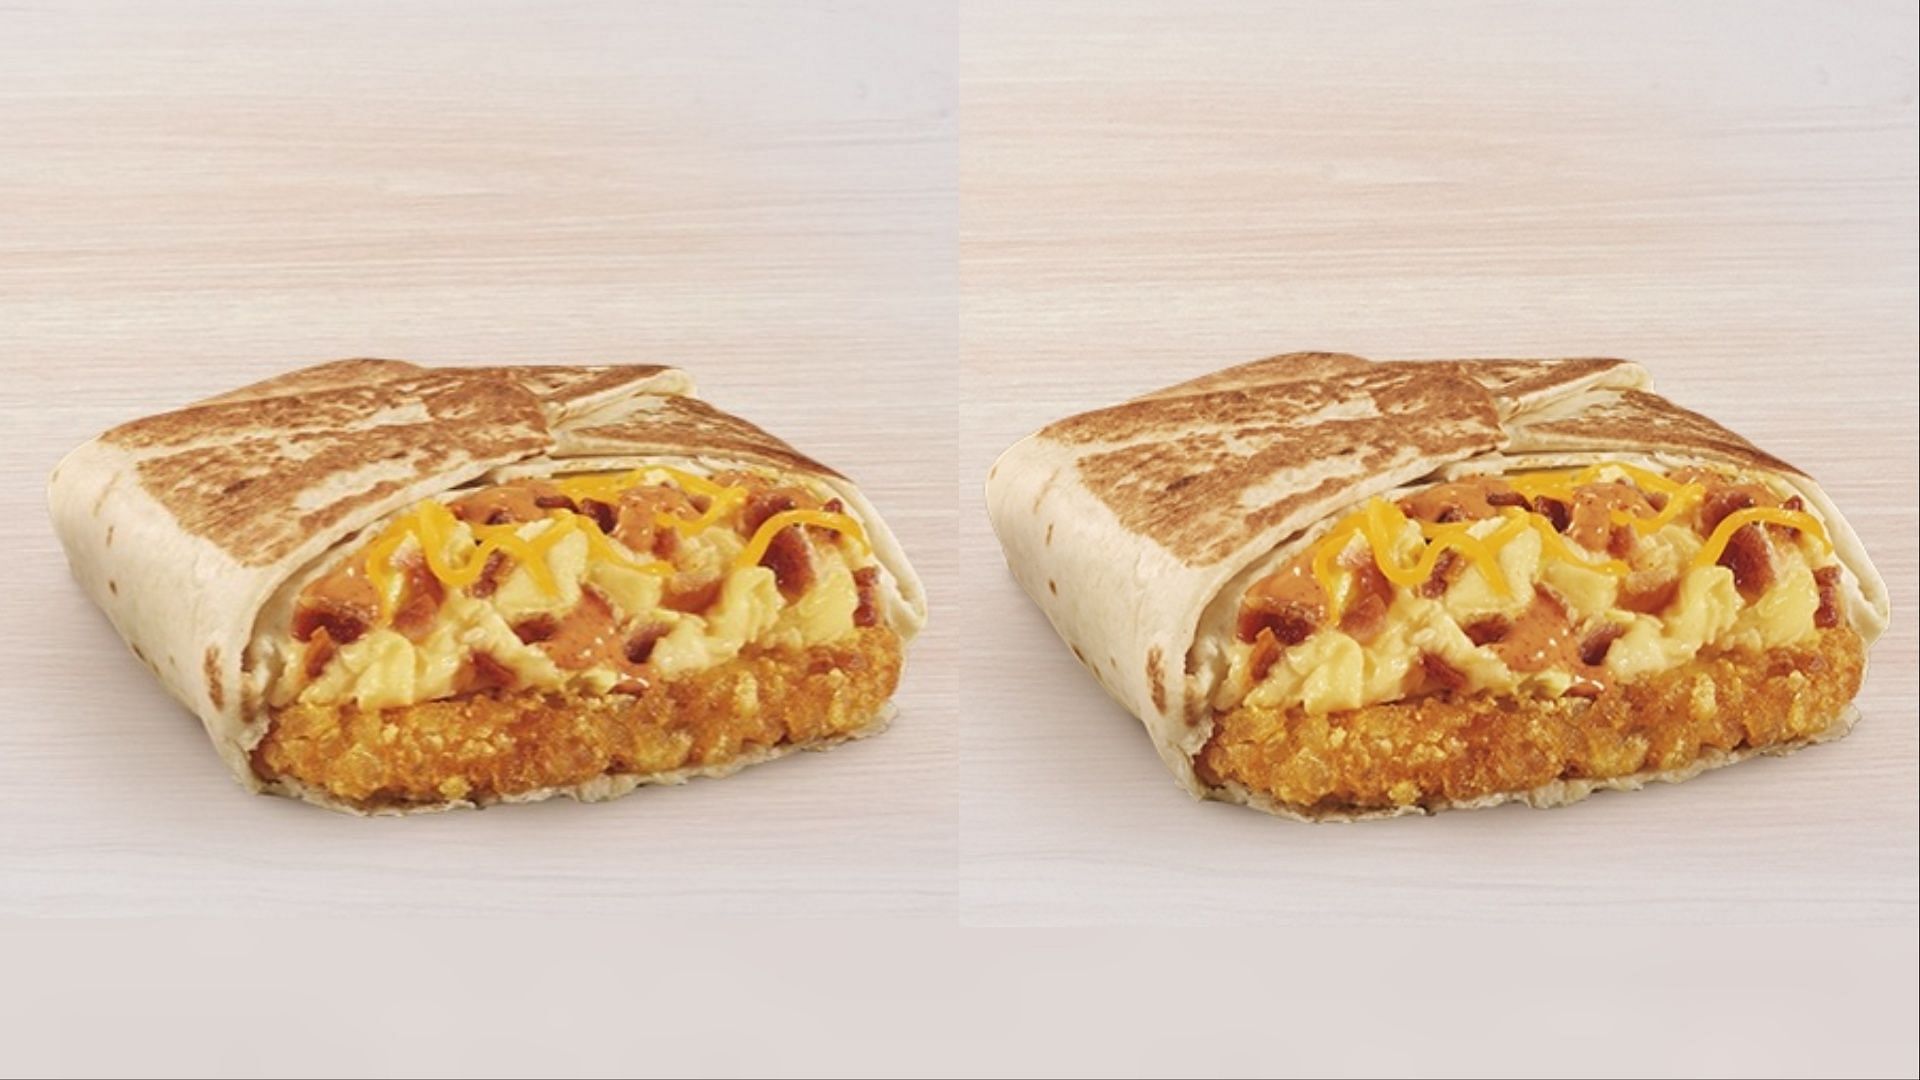 Fans can enjoy a free Breakfast Crunchwrap every Tuesday starting June 6 (Image via Taco Bell)